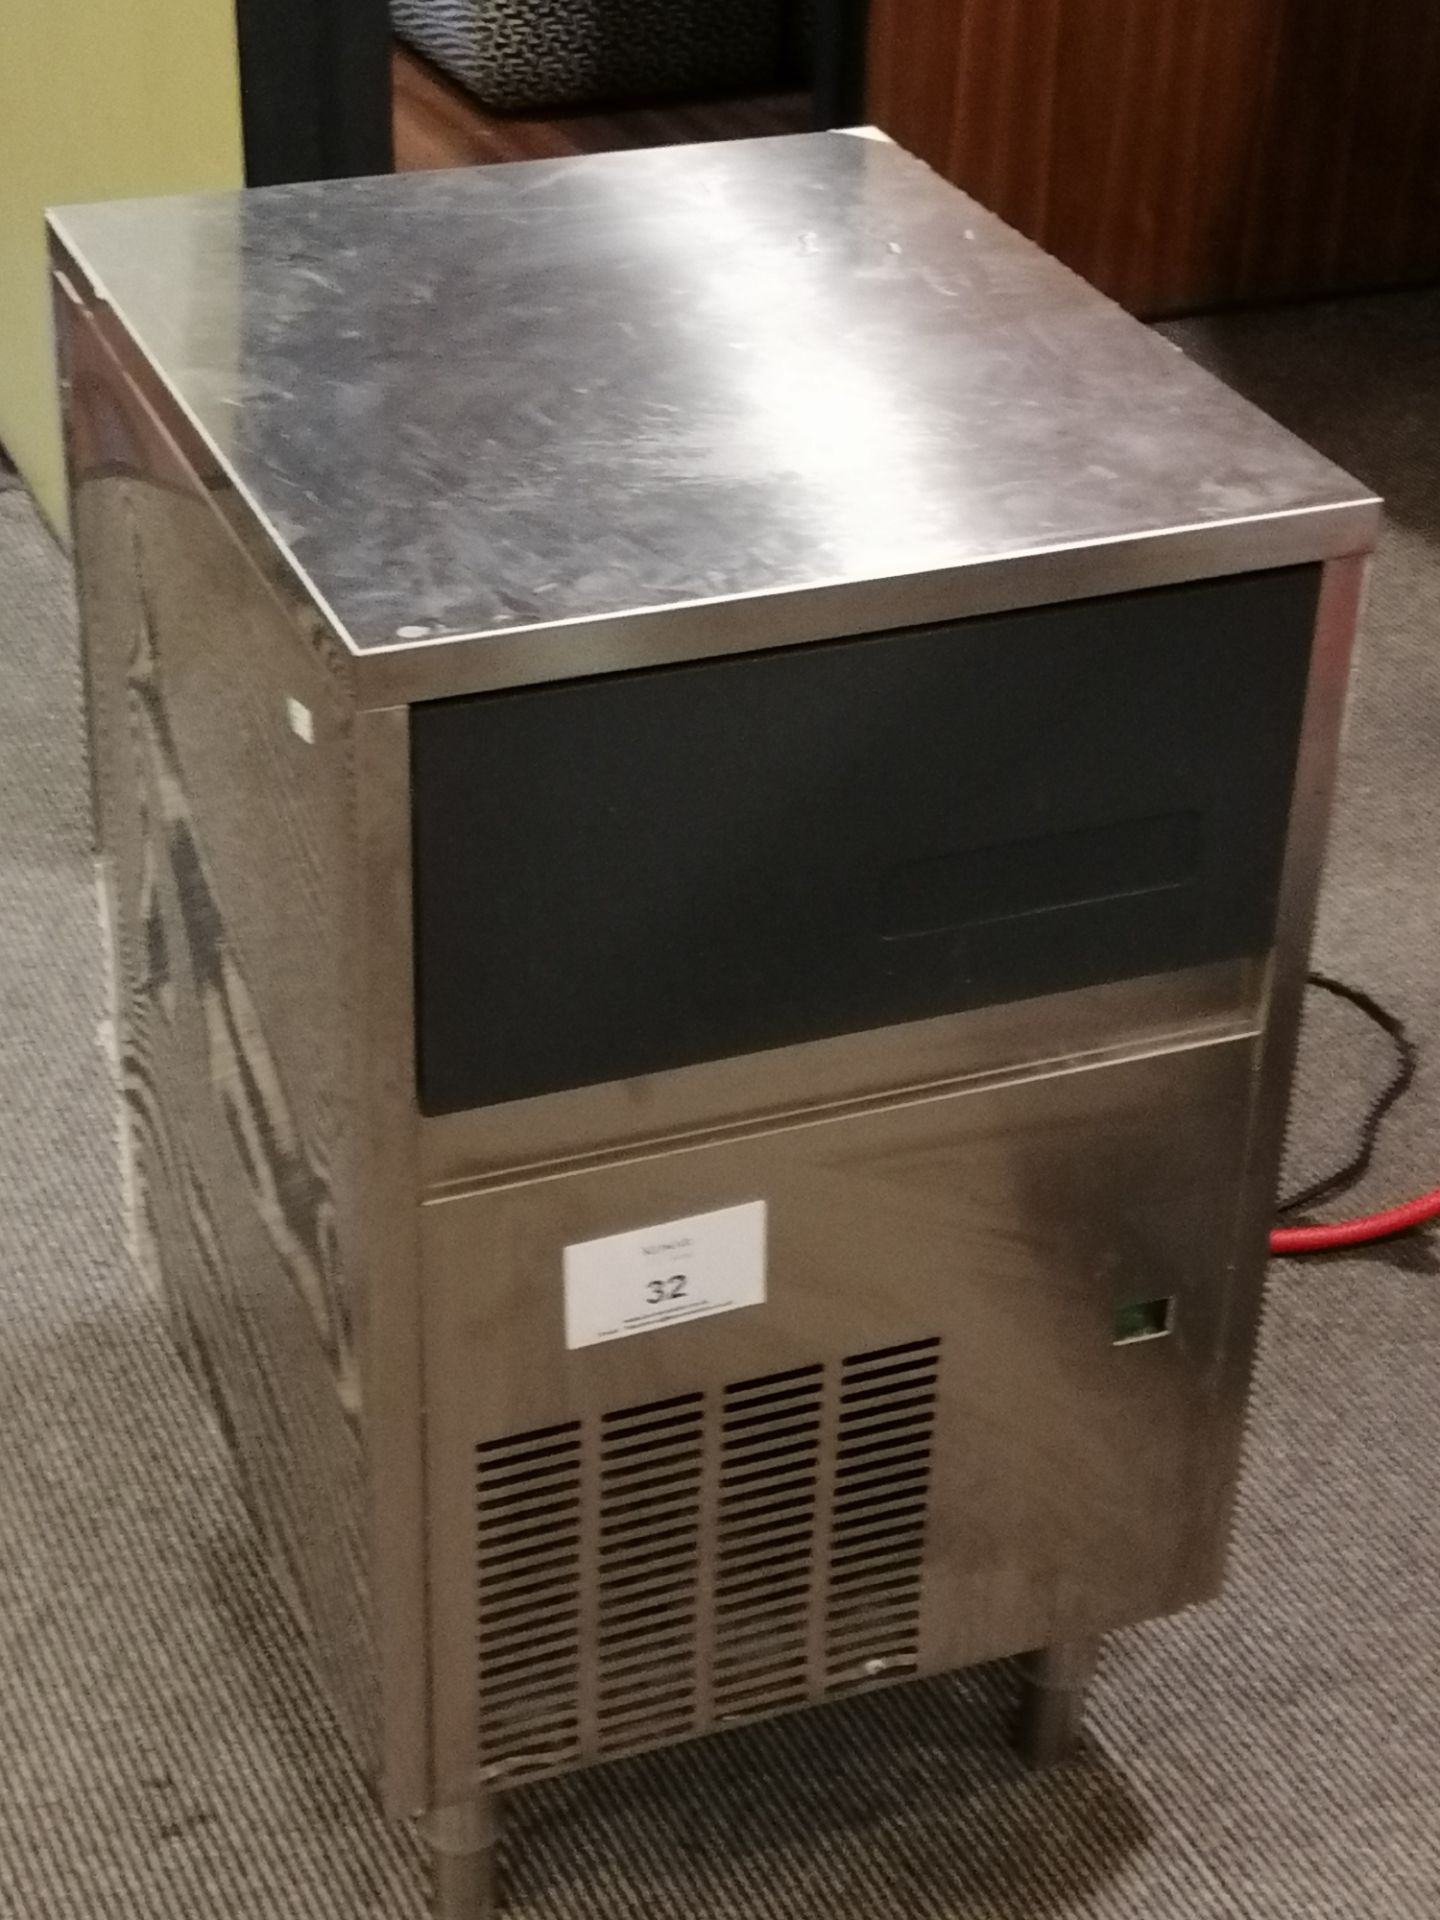 Maidaid Model M42-16 Ice maker, manufactured 2016 - Image 2 of 4